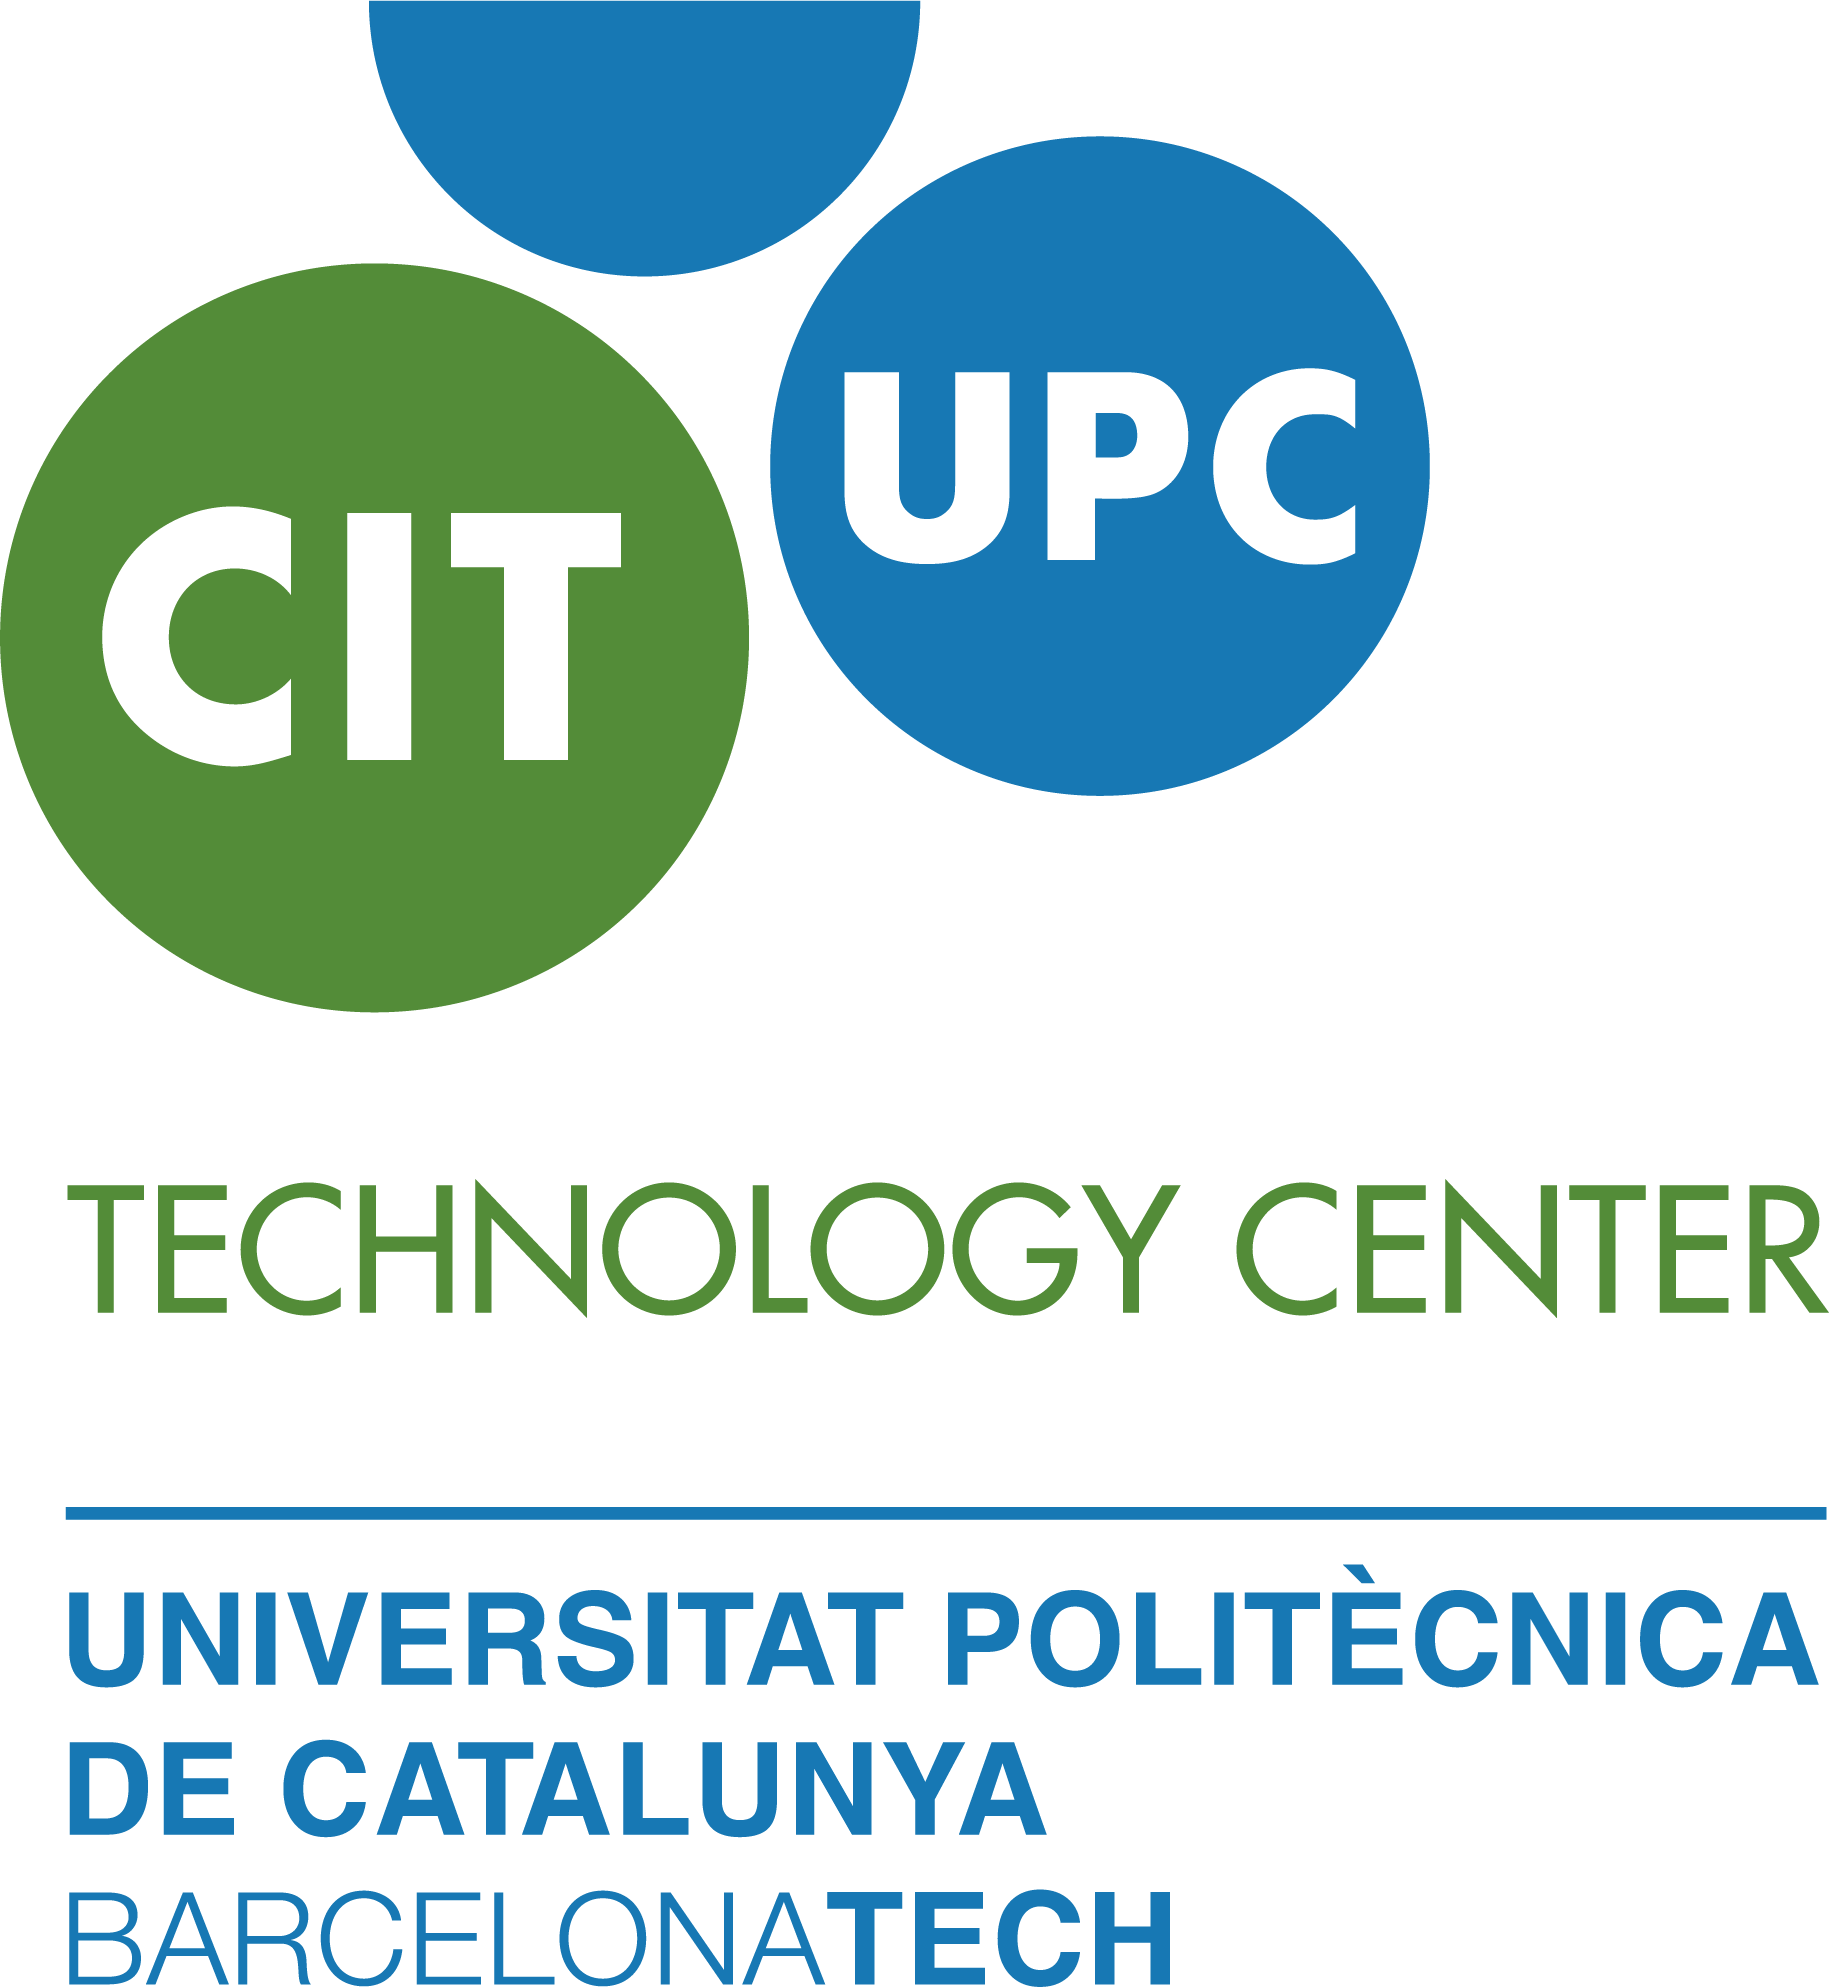 CIT-UPC: Innovation and Technological Solutions in mobility, health and flood alarm systems